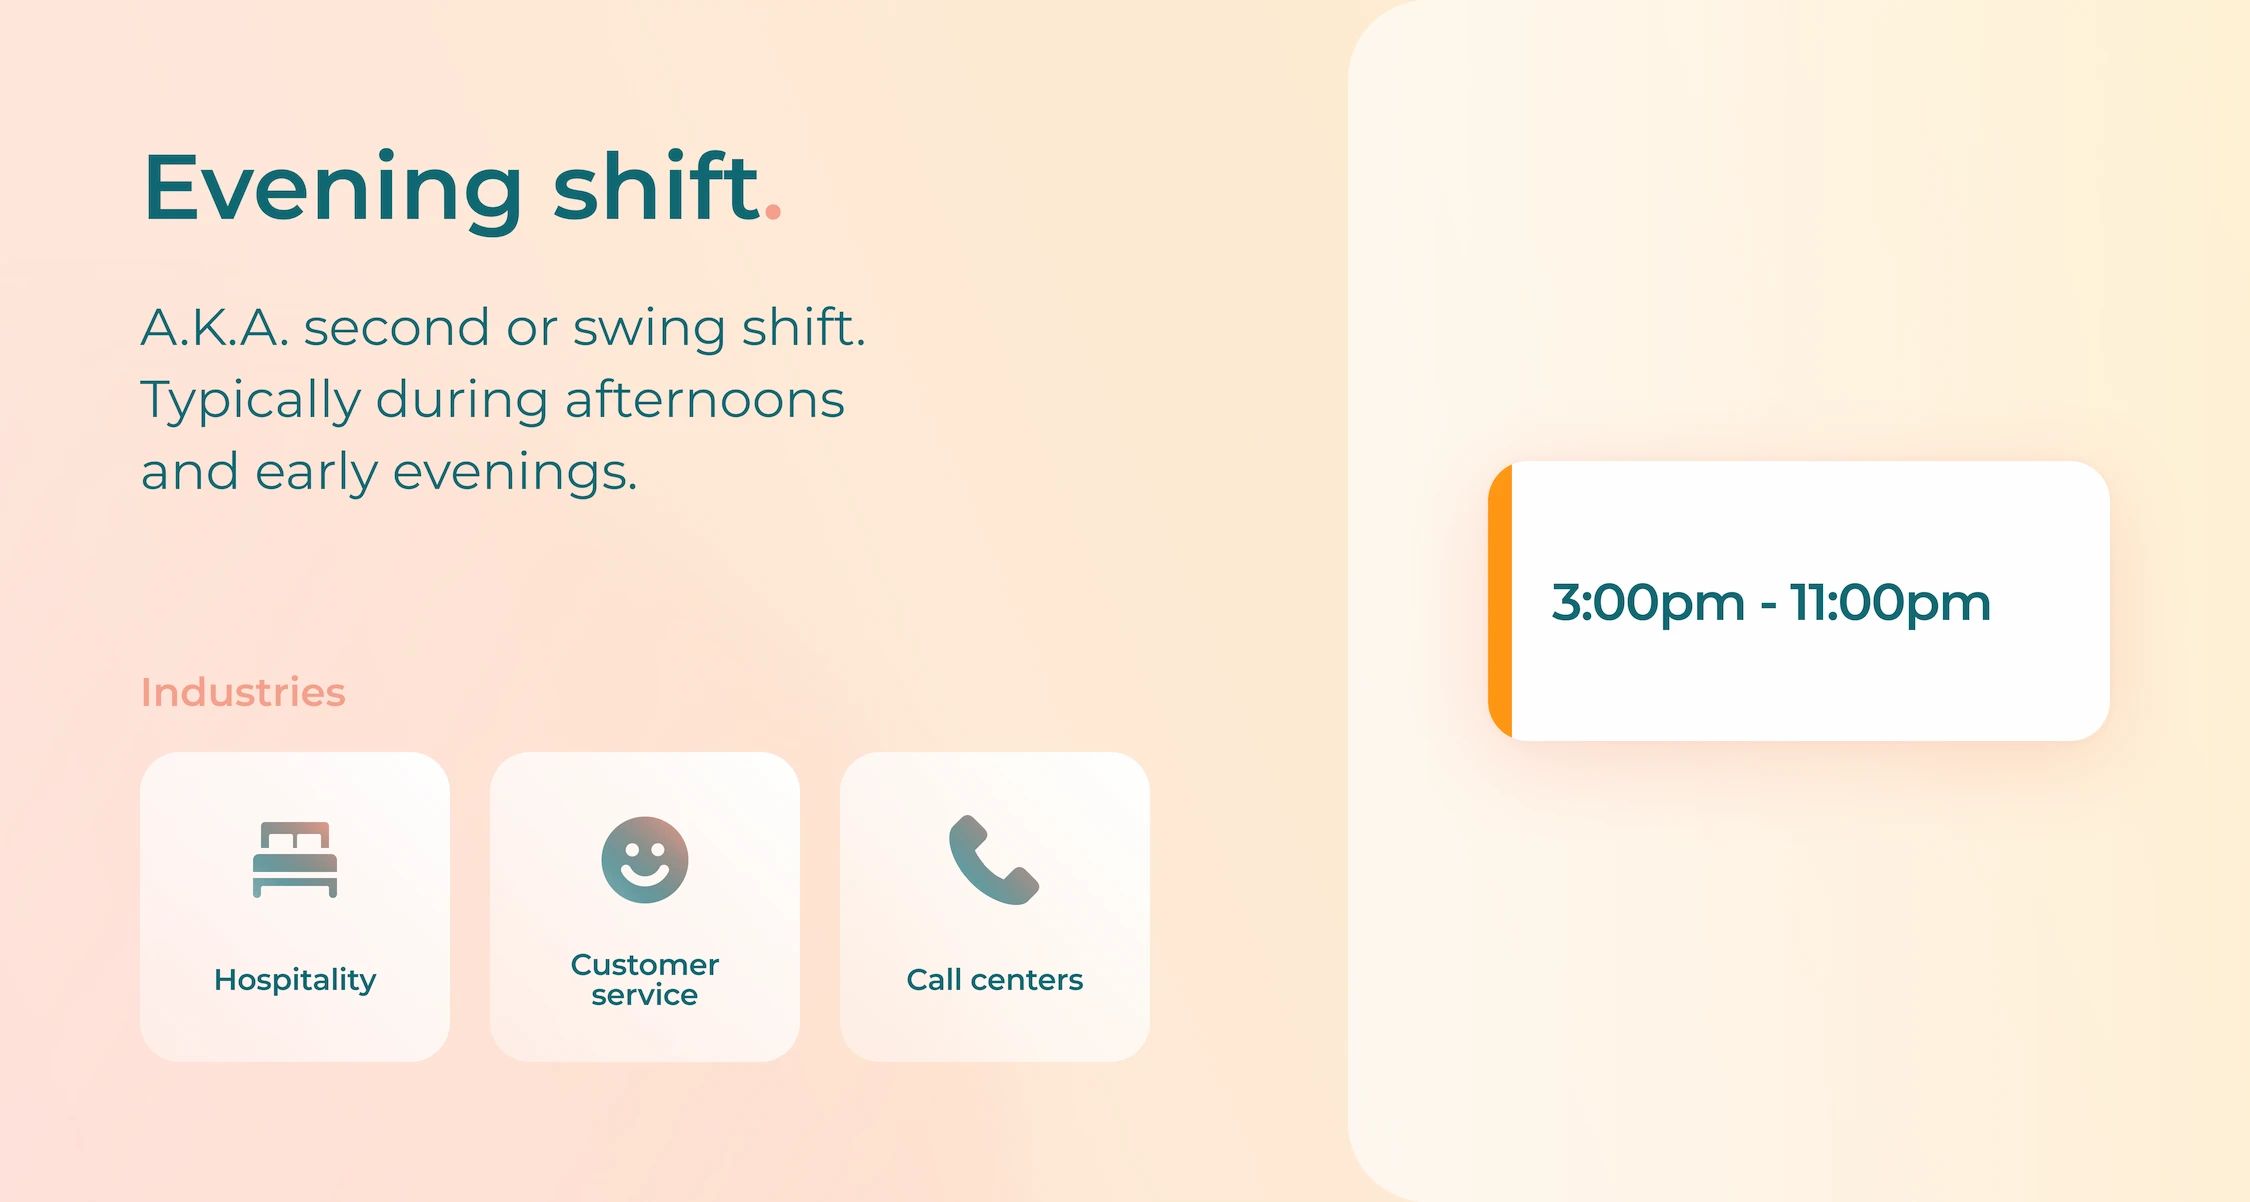 Image with details about evening shifts and industries that use them.